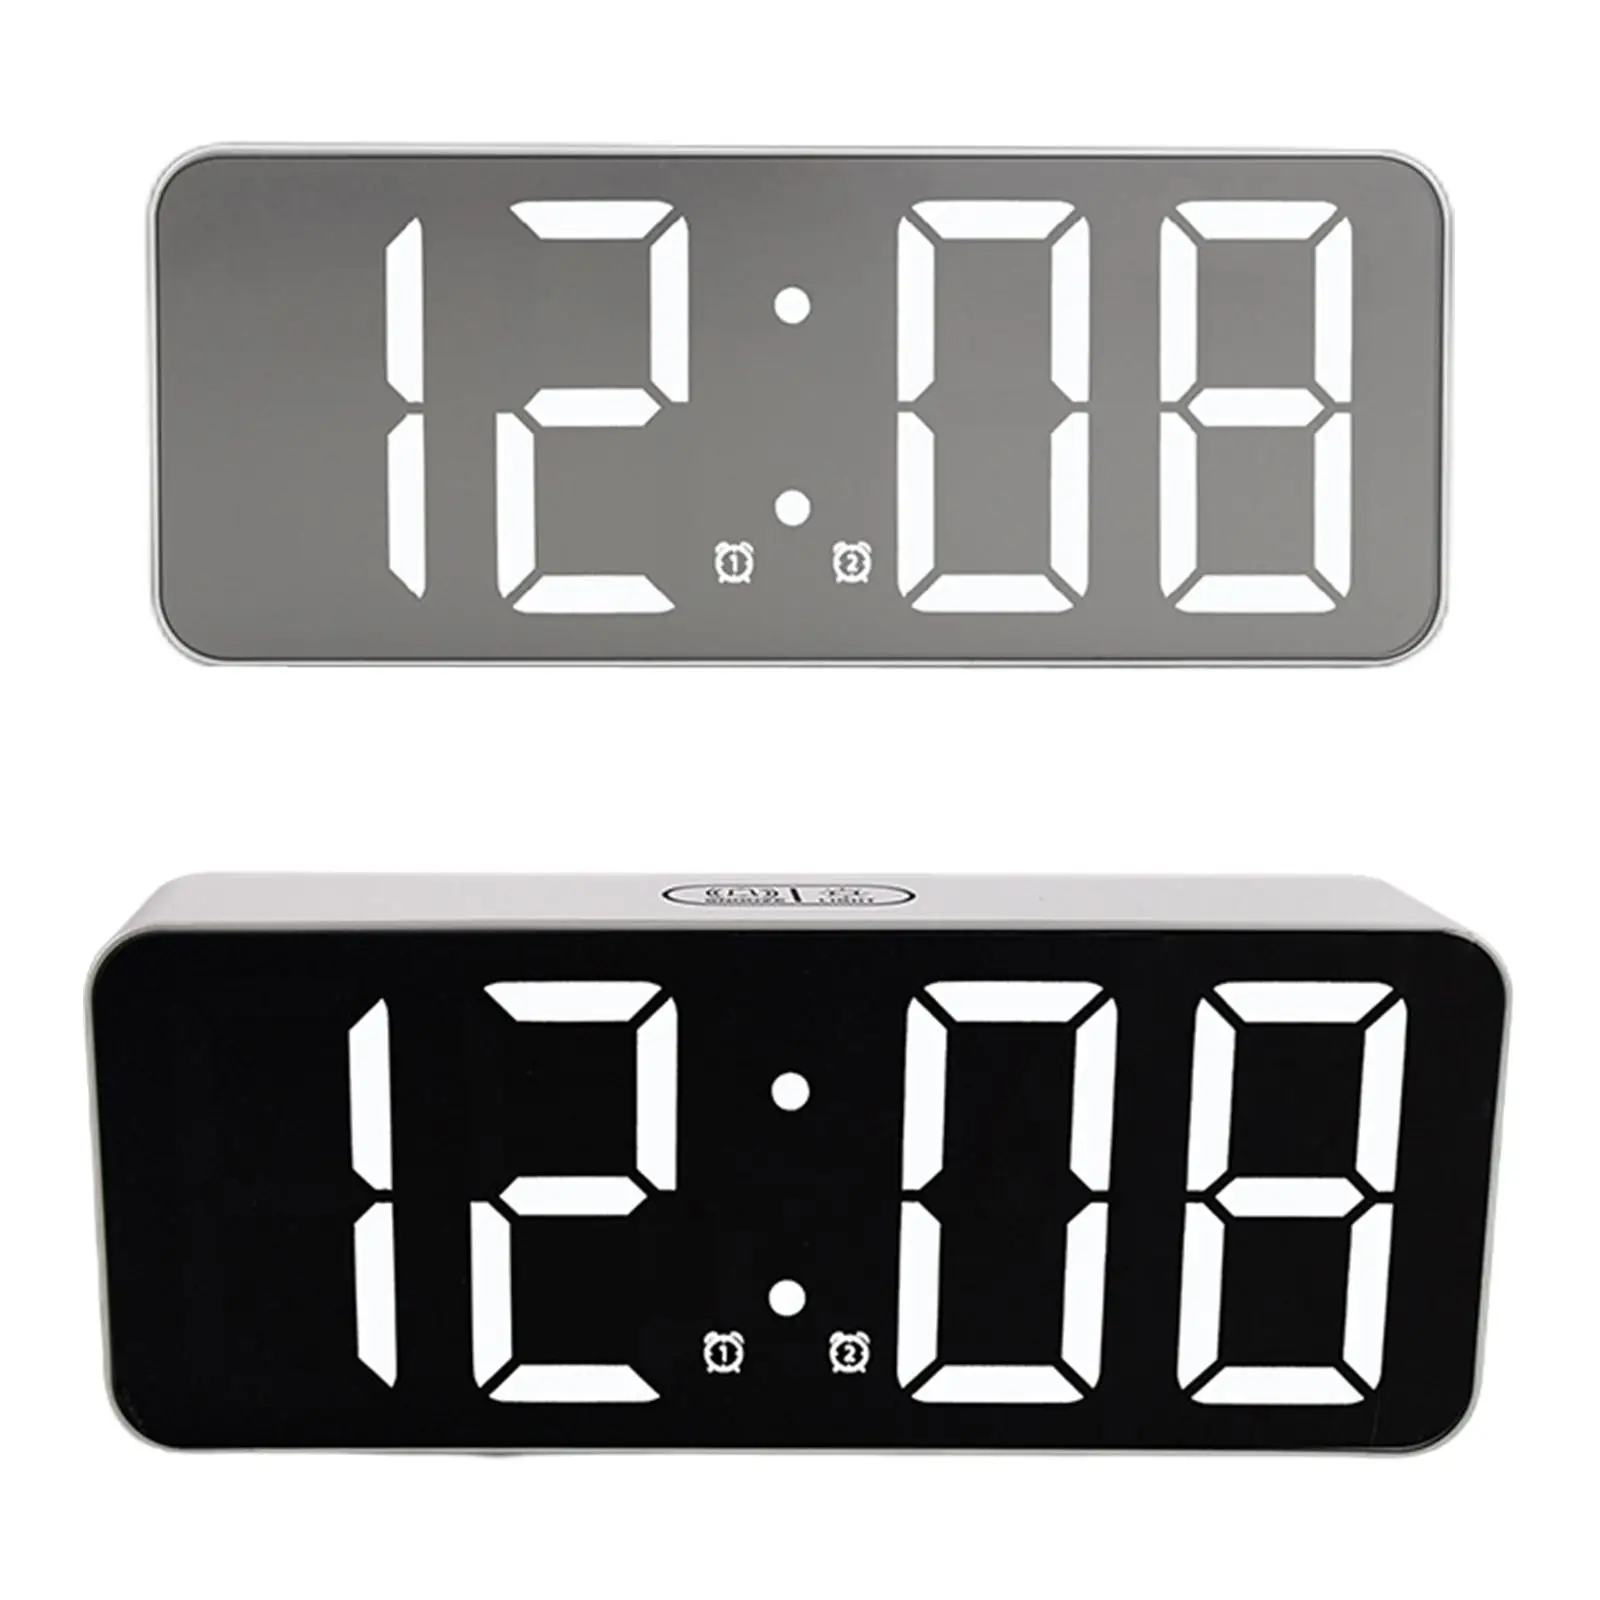 Electronic Desk Alarm Clock LED Digital Clock Mirrored for Home Office Teens